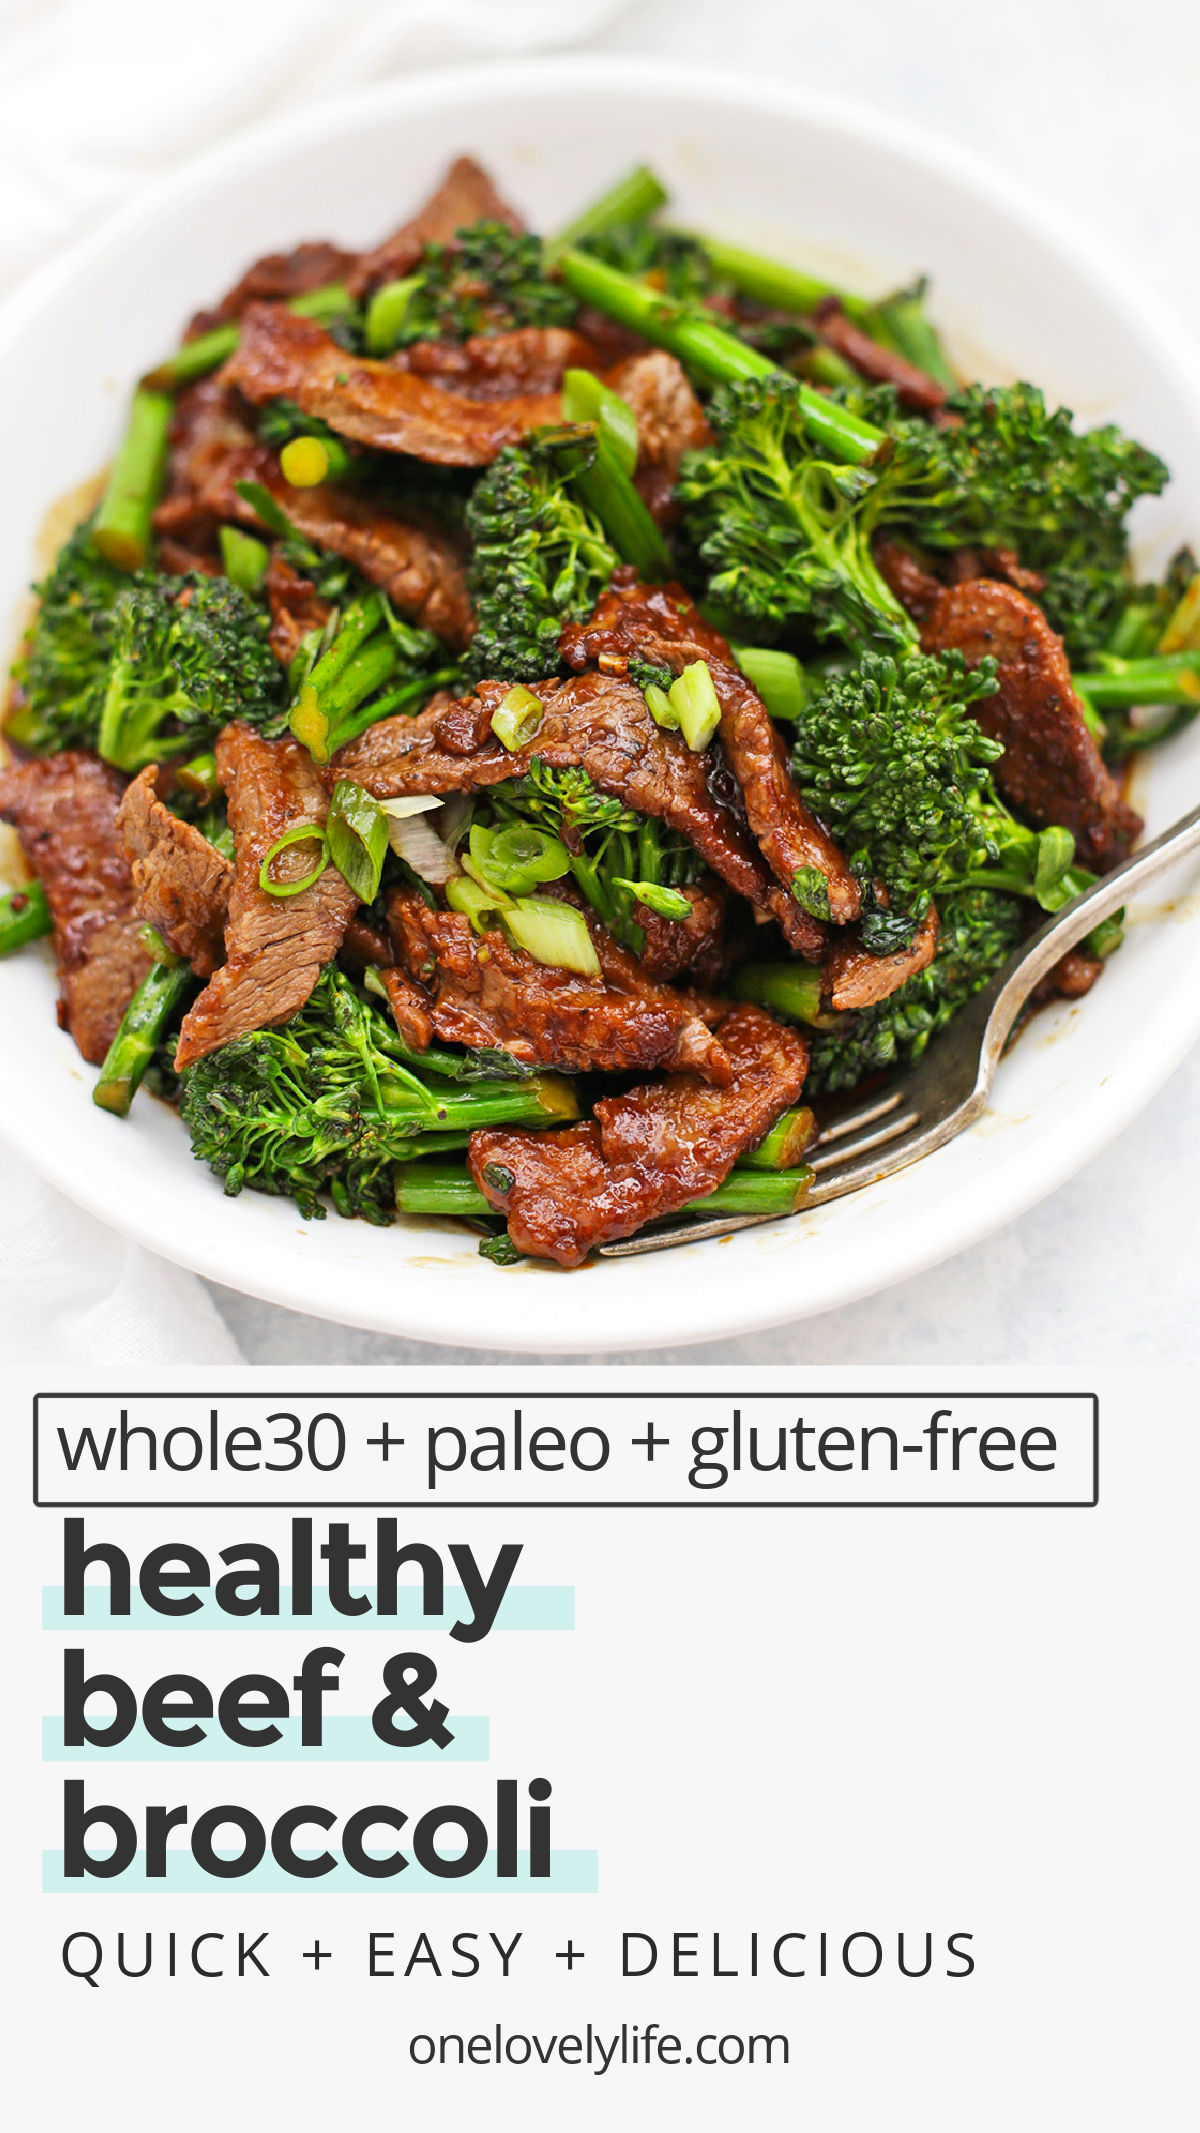 Healthy Beef and Broccoli - This take-out favorite is so easy to make at home and--BONUS--it's paleo, gluten free, and Whole30 approved! // paleo beef and broccoli // whole30 beef and broccoli, low carb beef and broccoli // beef and broccoli recipe // healthy stir fry // quick dinner // healthy dinner // whole30 dinner // paleo dinner // healthy beef recipe